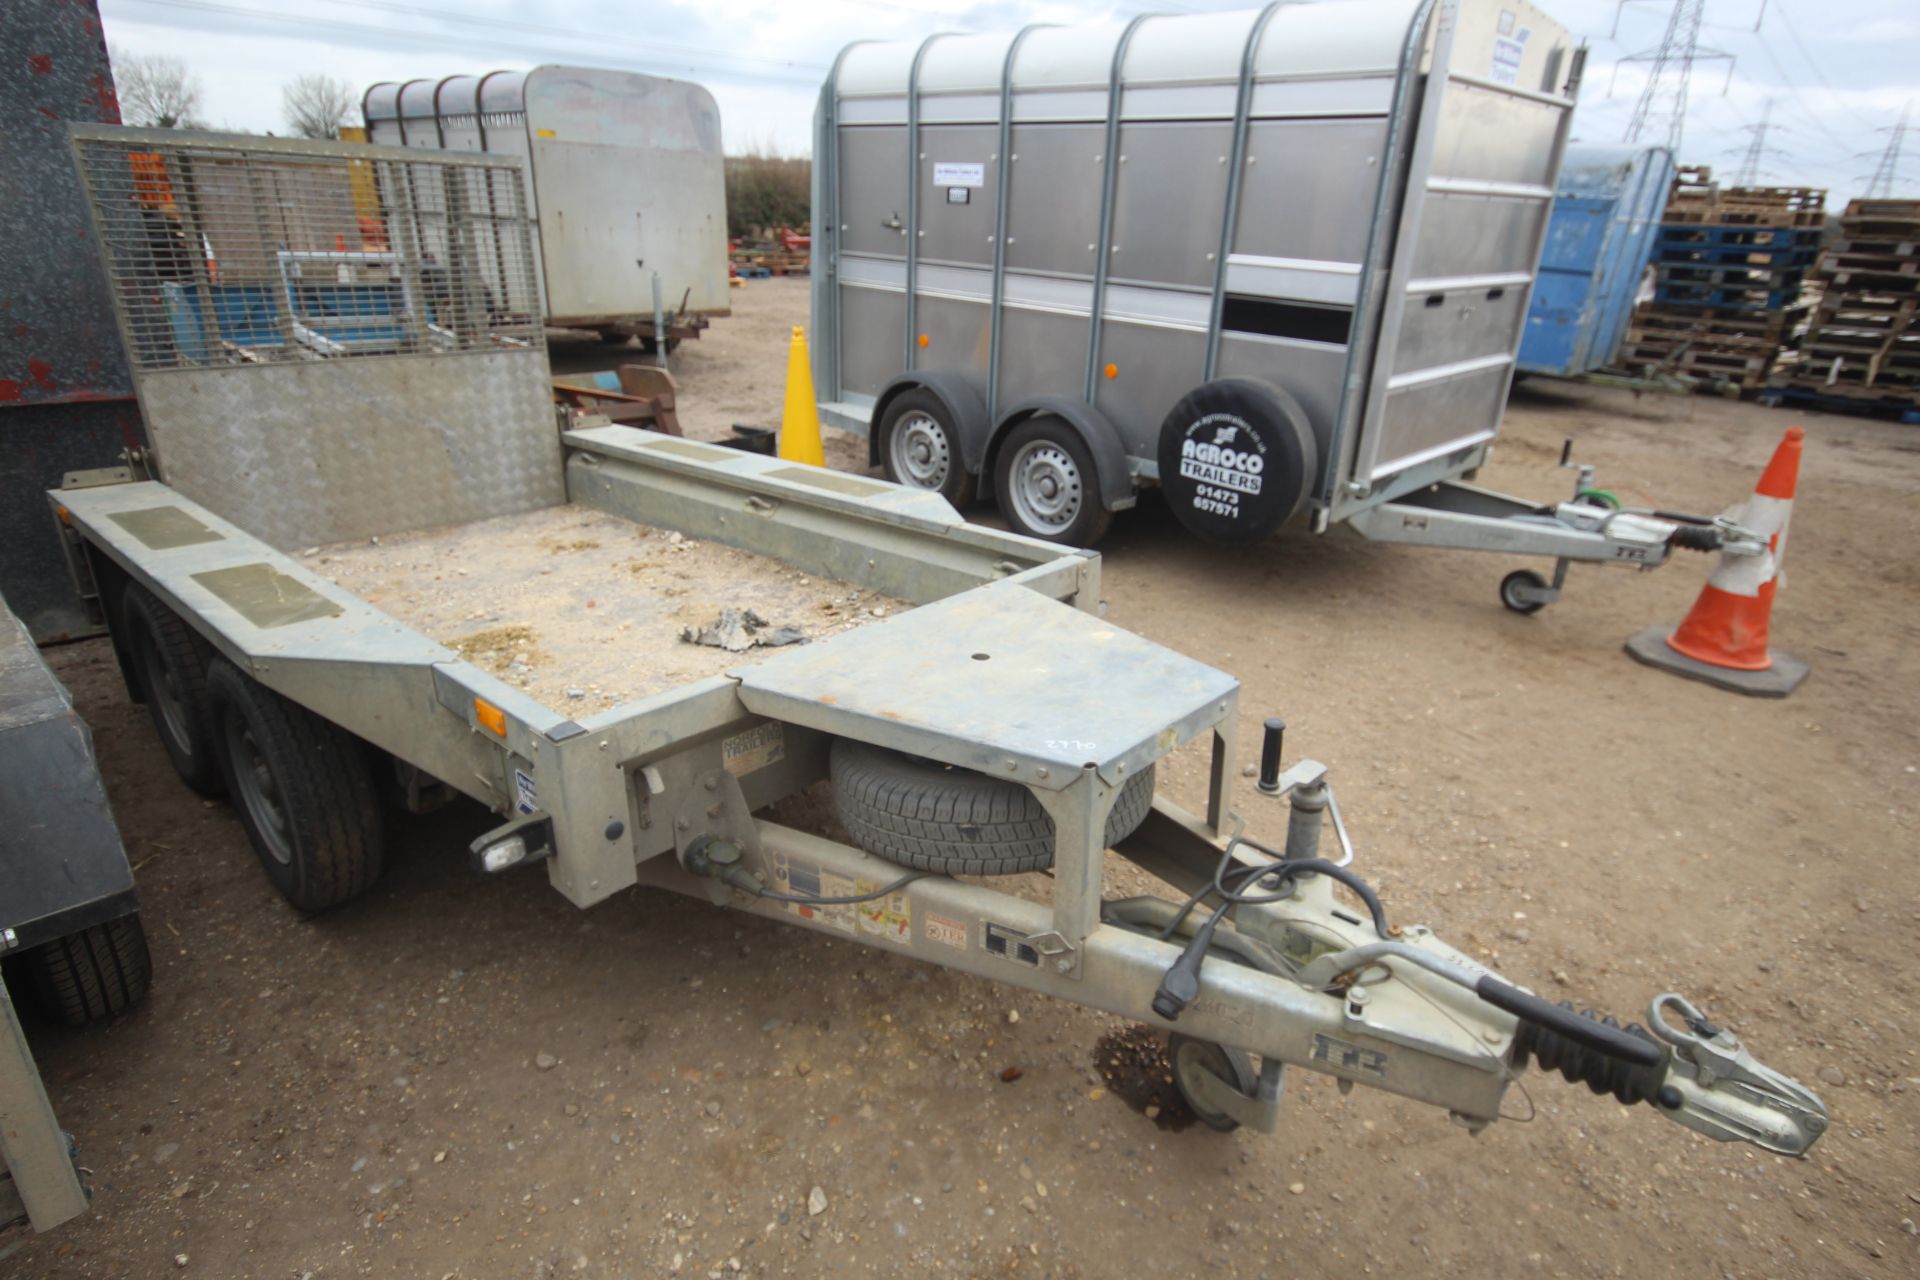 Ifor Williams GX84 8ft x 4ft twin axle plant trailer. With full width ramp. For sale on behalf of